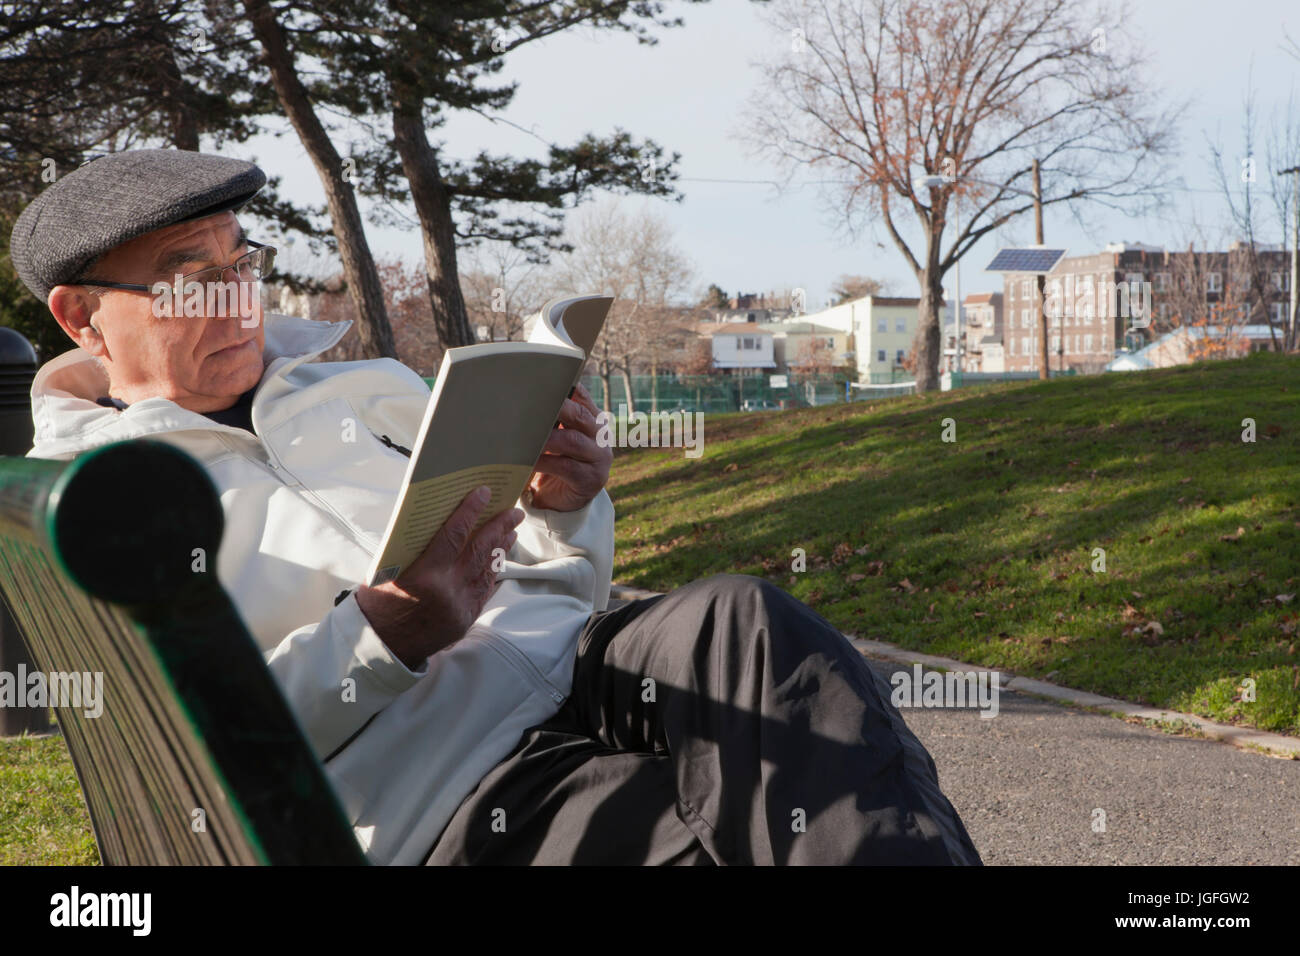 Hispanic man sitting on park bench reading book Banque D'Images